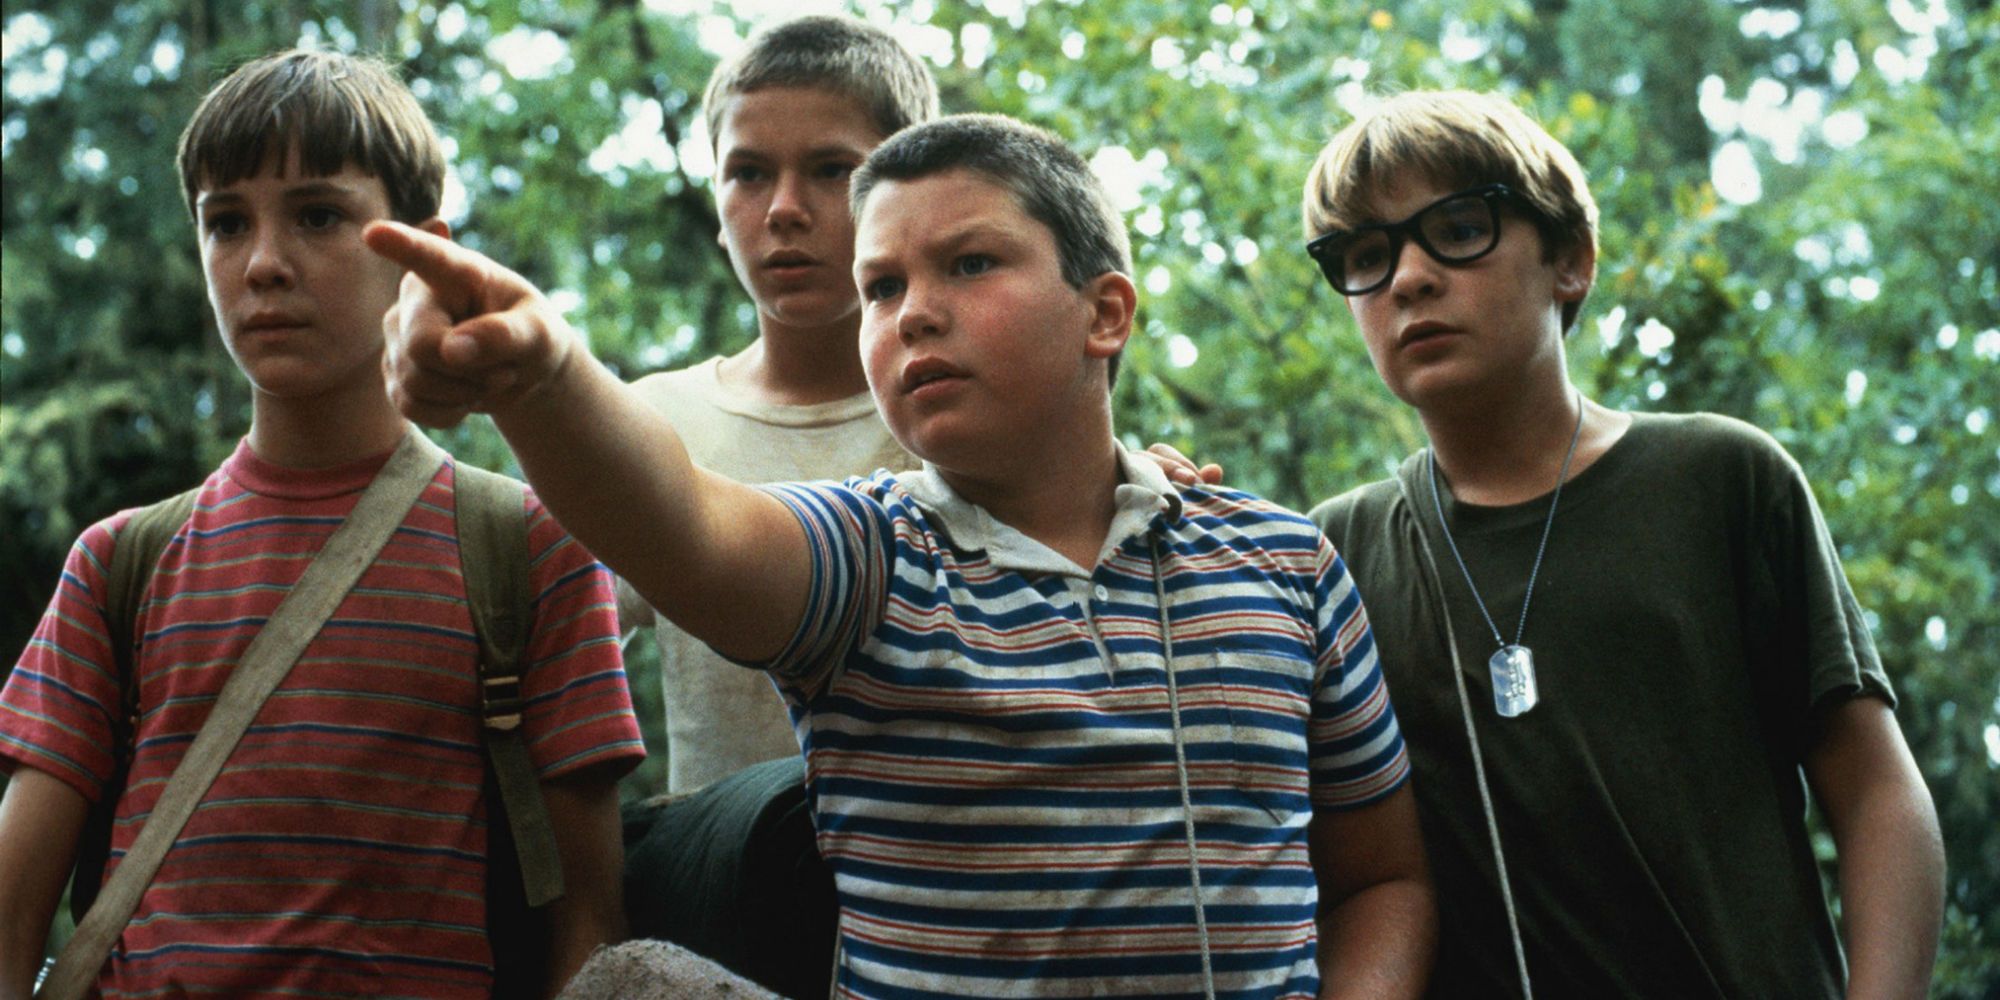 A group of young boys in Stand By Me Stephen King